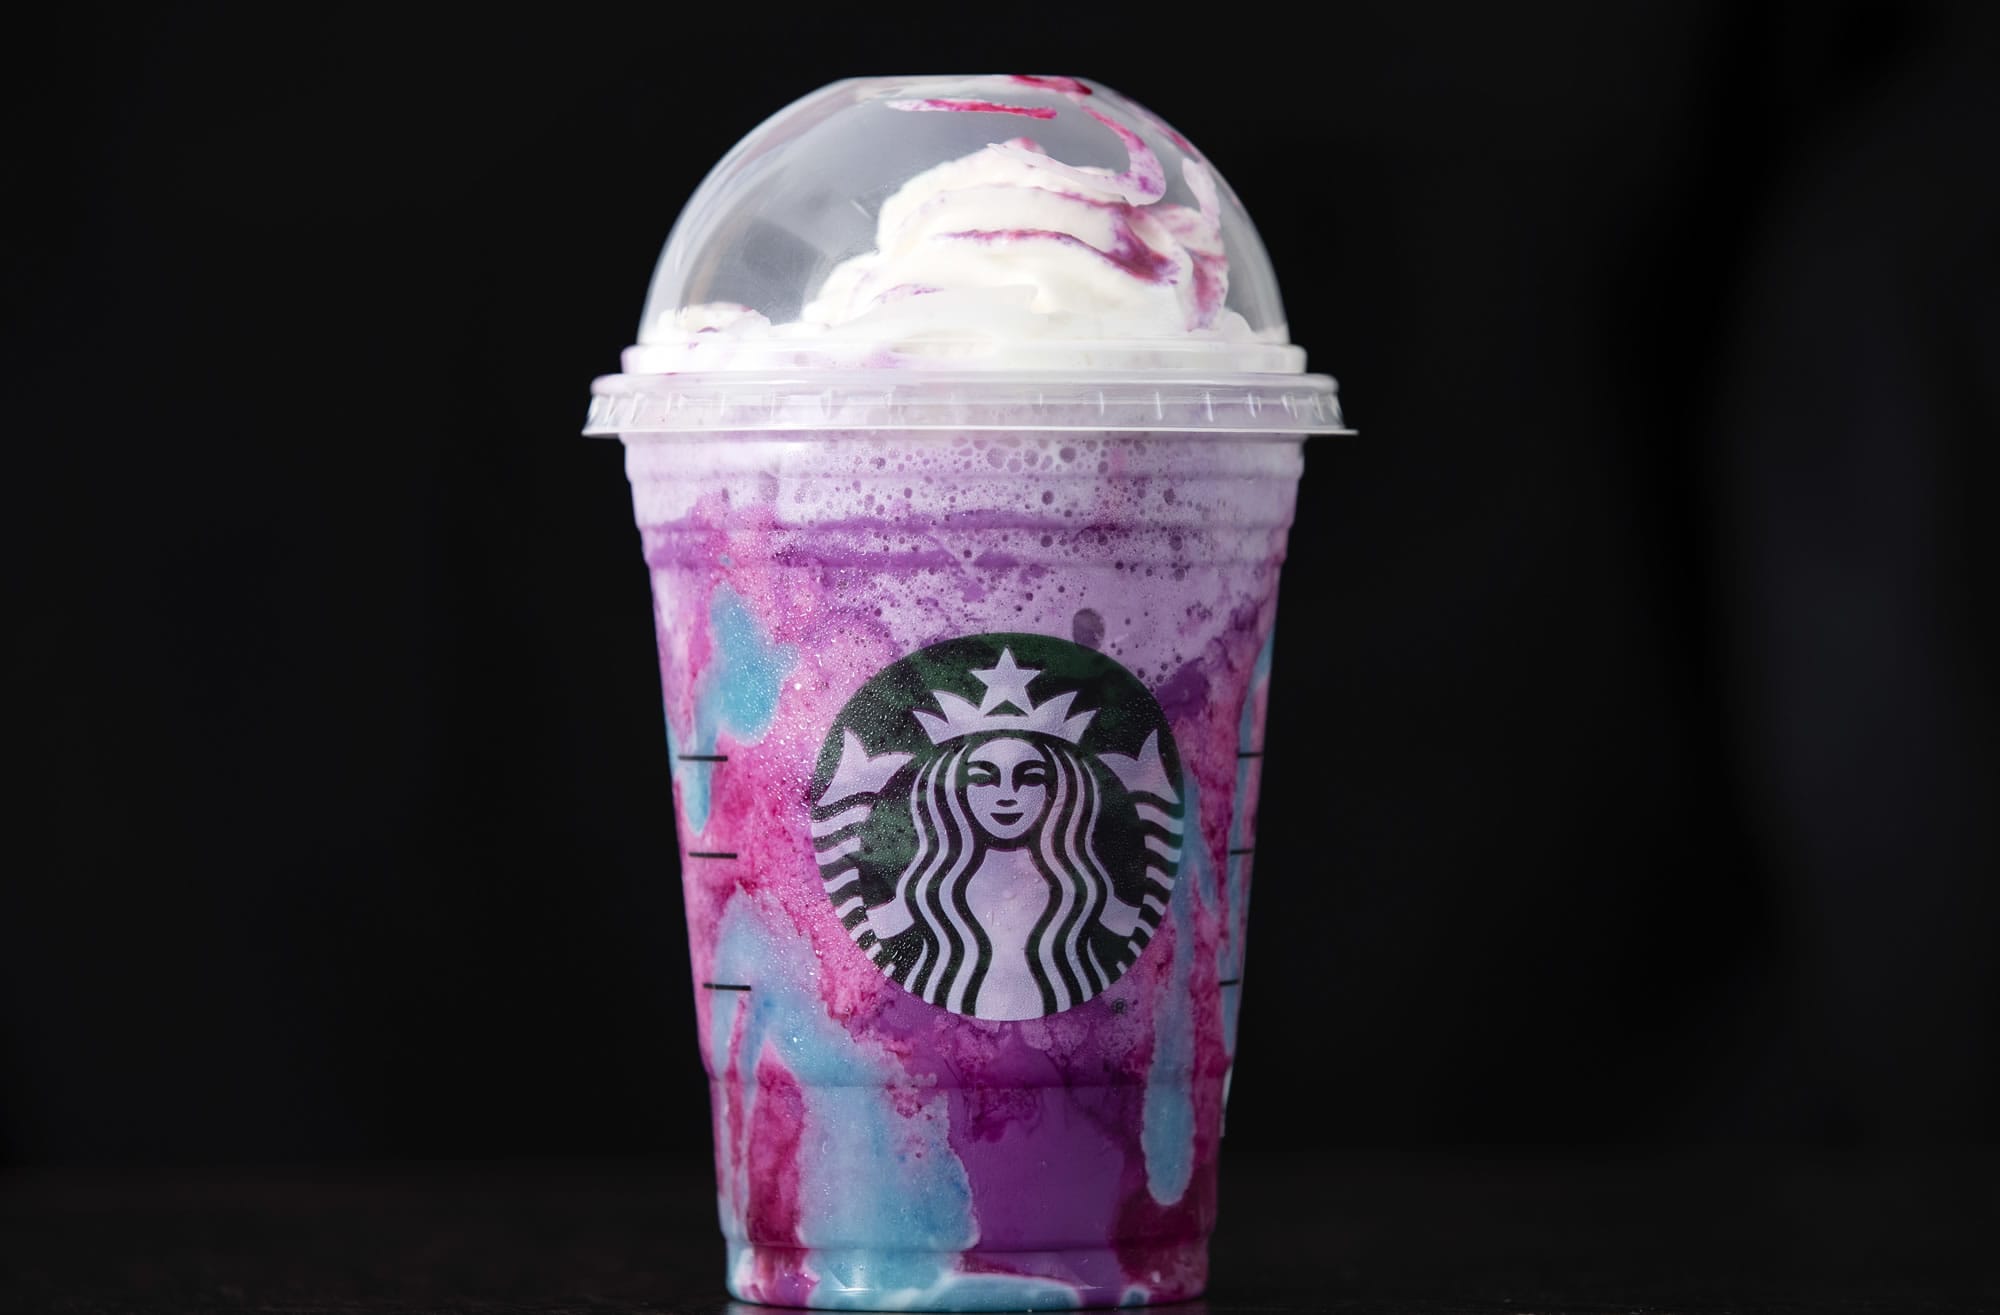 A Starbucks Unicorn Frappuccino drink sits on display, Thursday, April 20, 2017, in Philadelphia. Starbucks' entry into the unicorn food craze was released Wednesday and its popularity was too much for Colorado barista Braden Burson. He posted a video on Twitter complaining that the drink was difficult to make and he's "never been so stressed out" in his life.